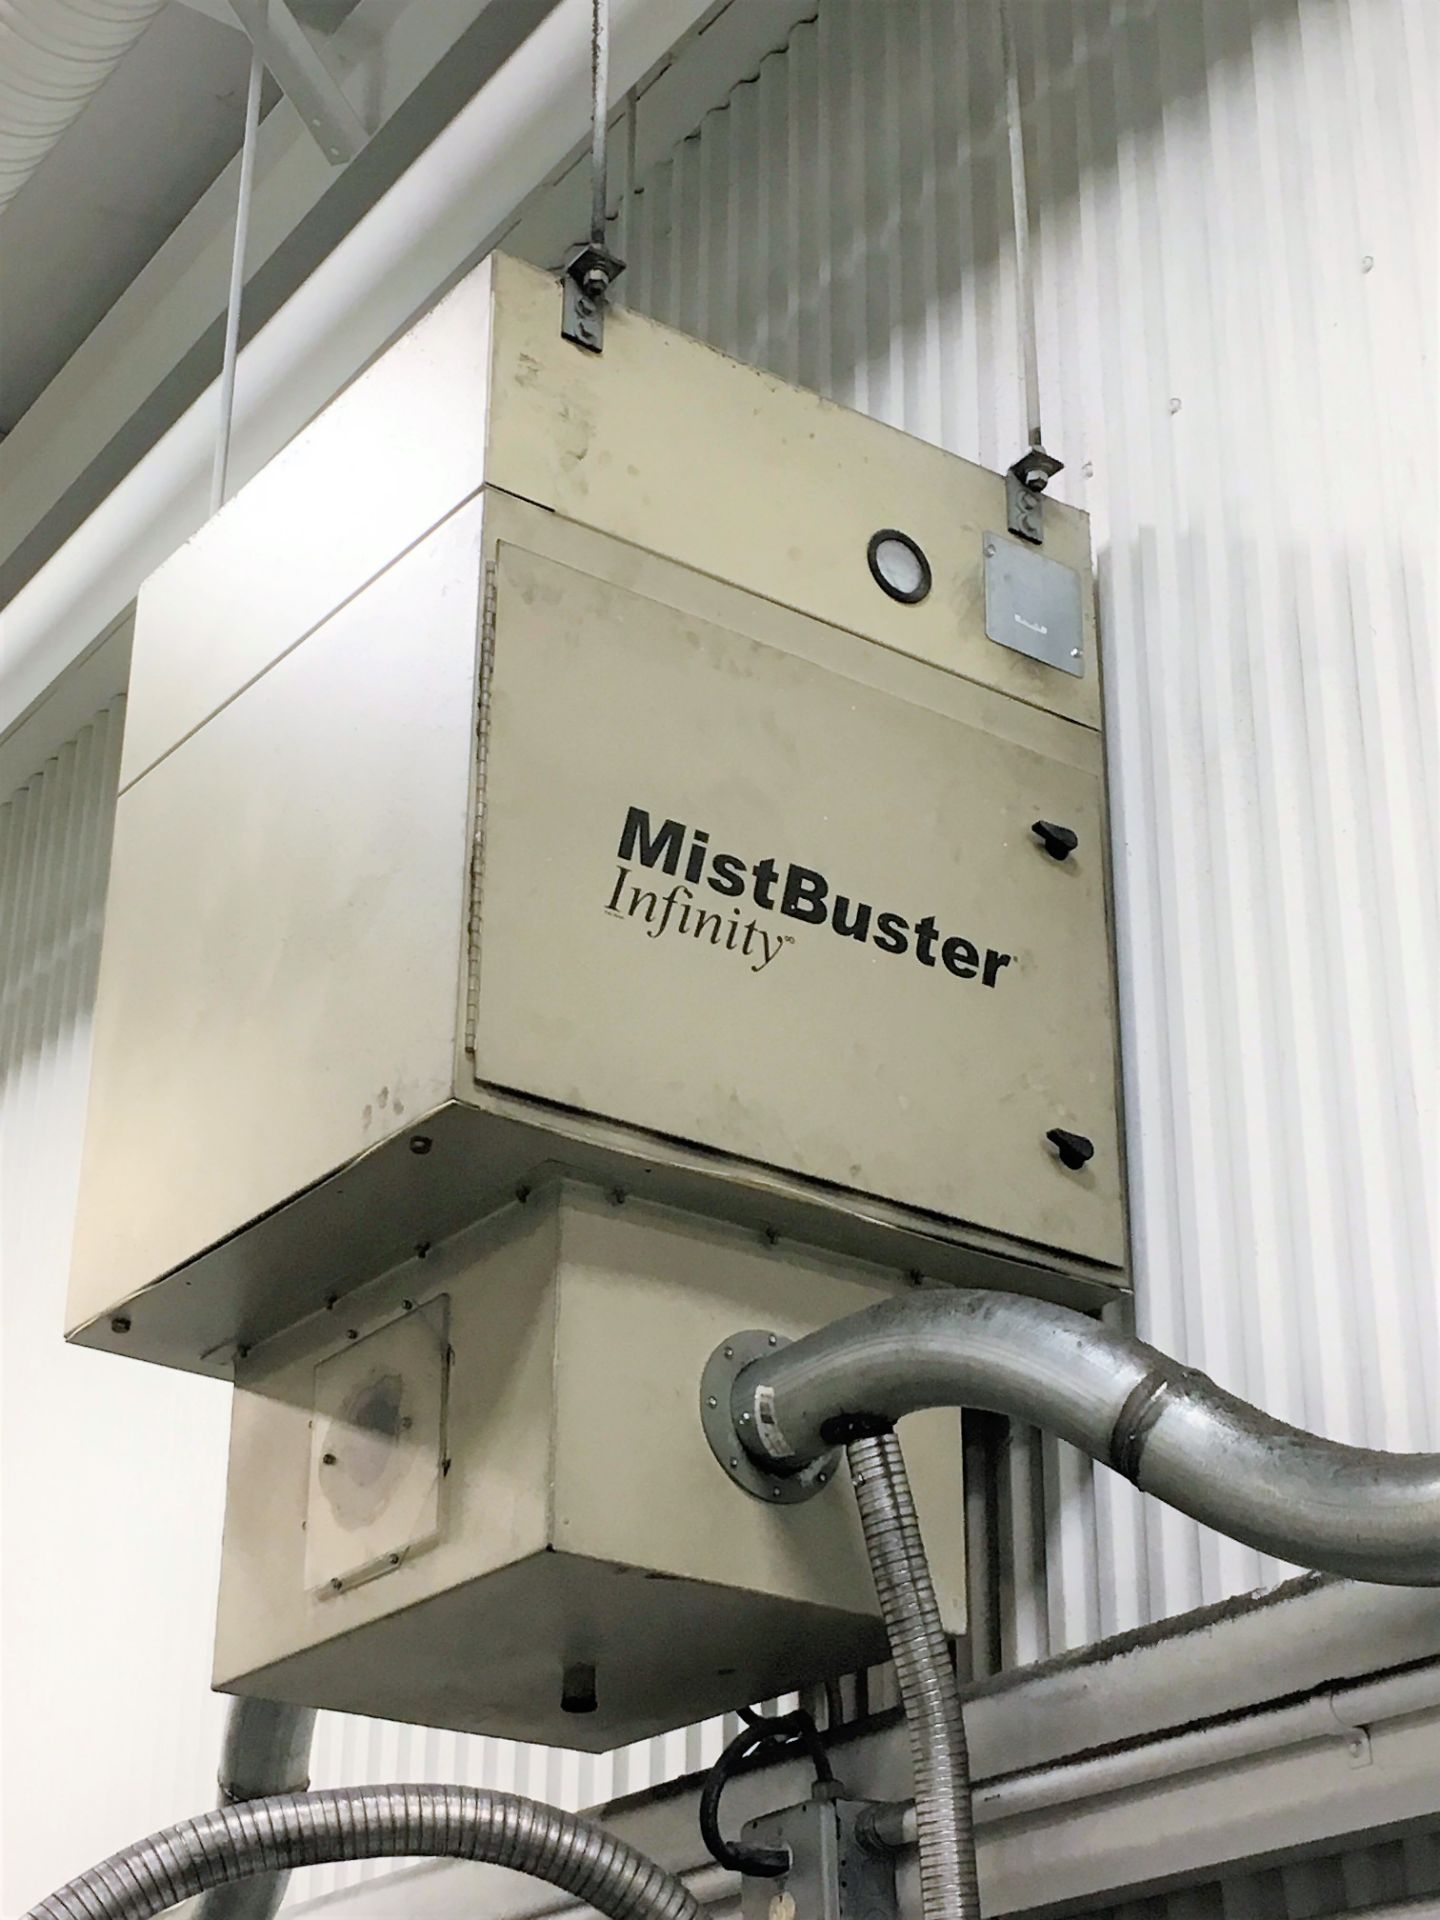 MISTBUSTER # INFINITY MIST & DUST COLLECTOR (UNIT IS MOUNTED HANGING FROM CEILING)